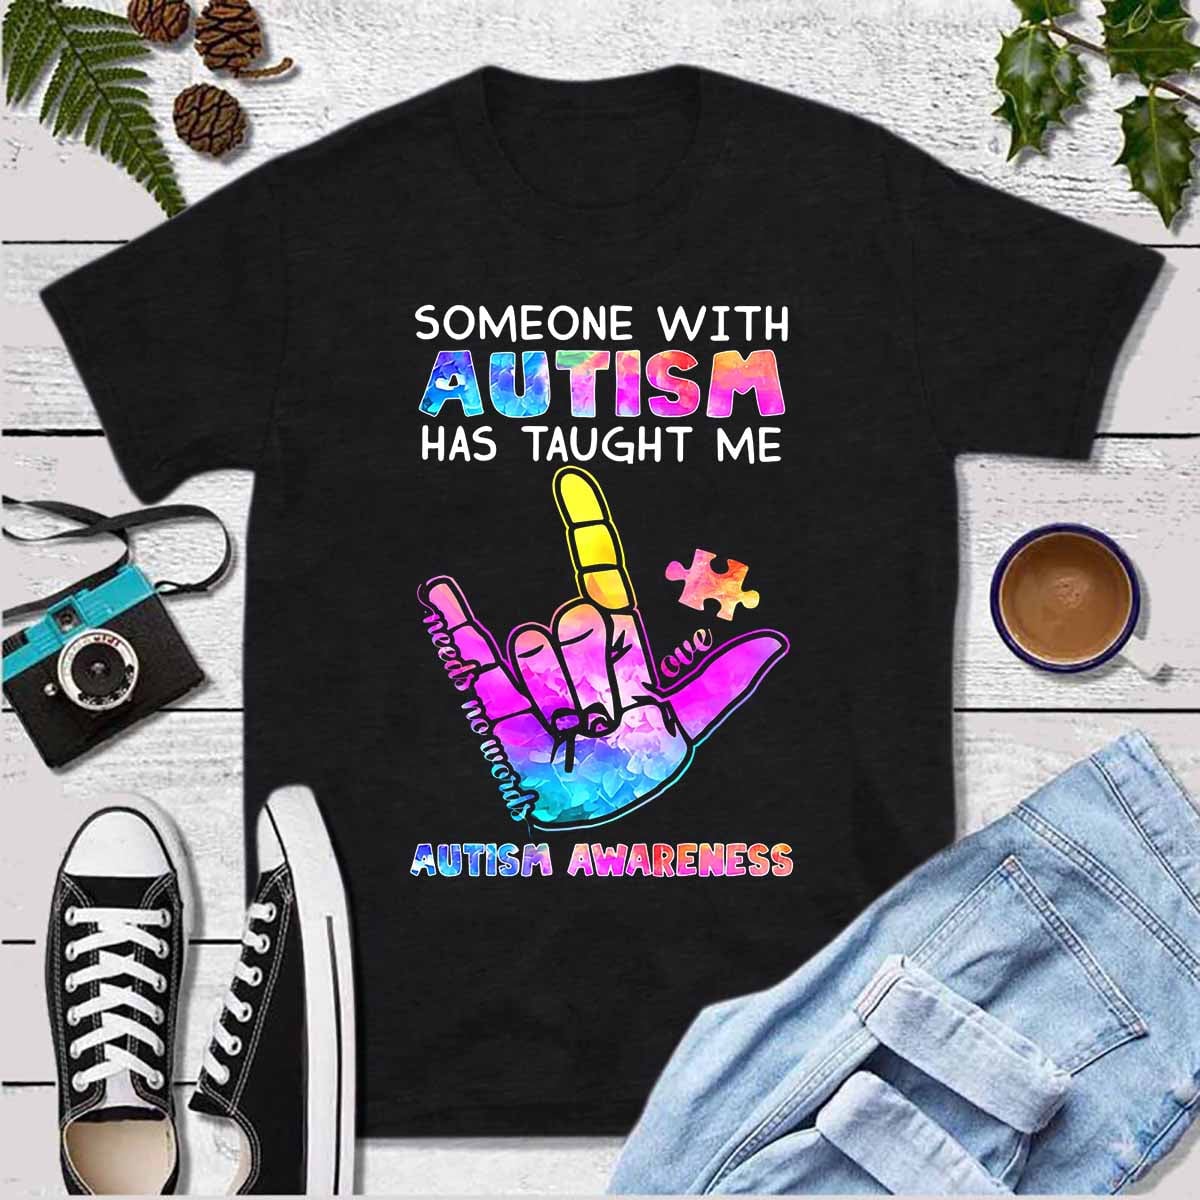 Someone with autism has taught me love, Love needs no words - Autism awareness